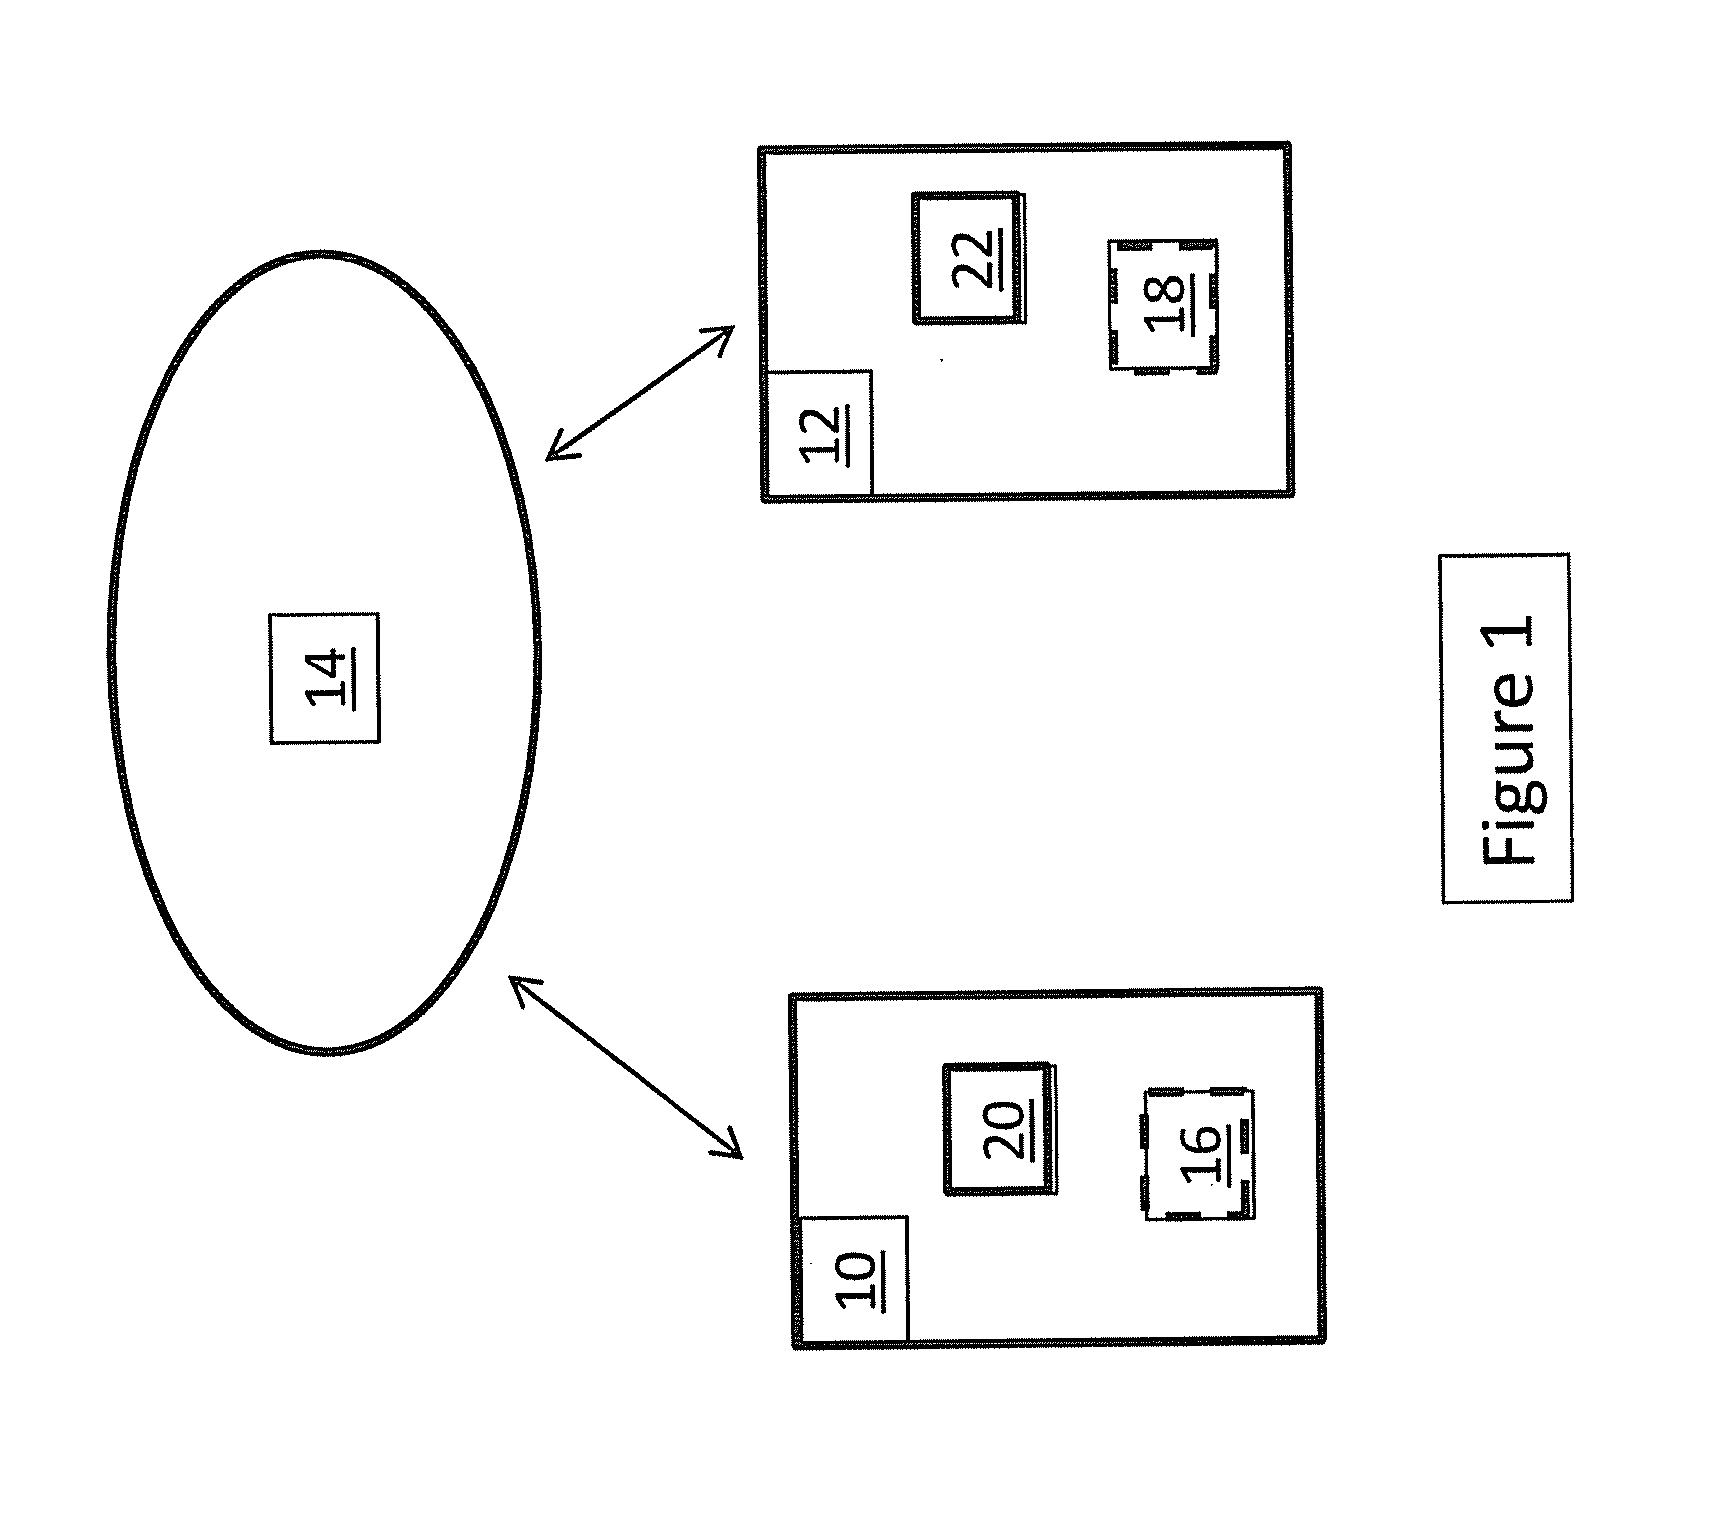 Method and system to synchronize data sets for personal devices